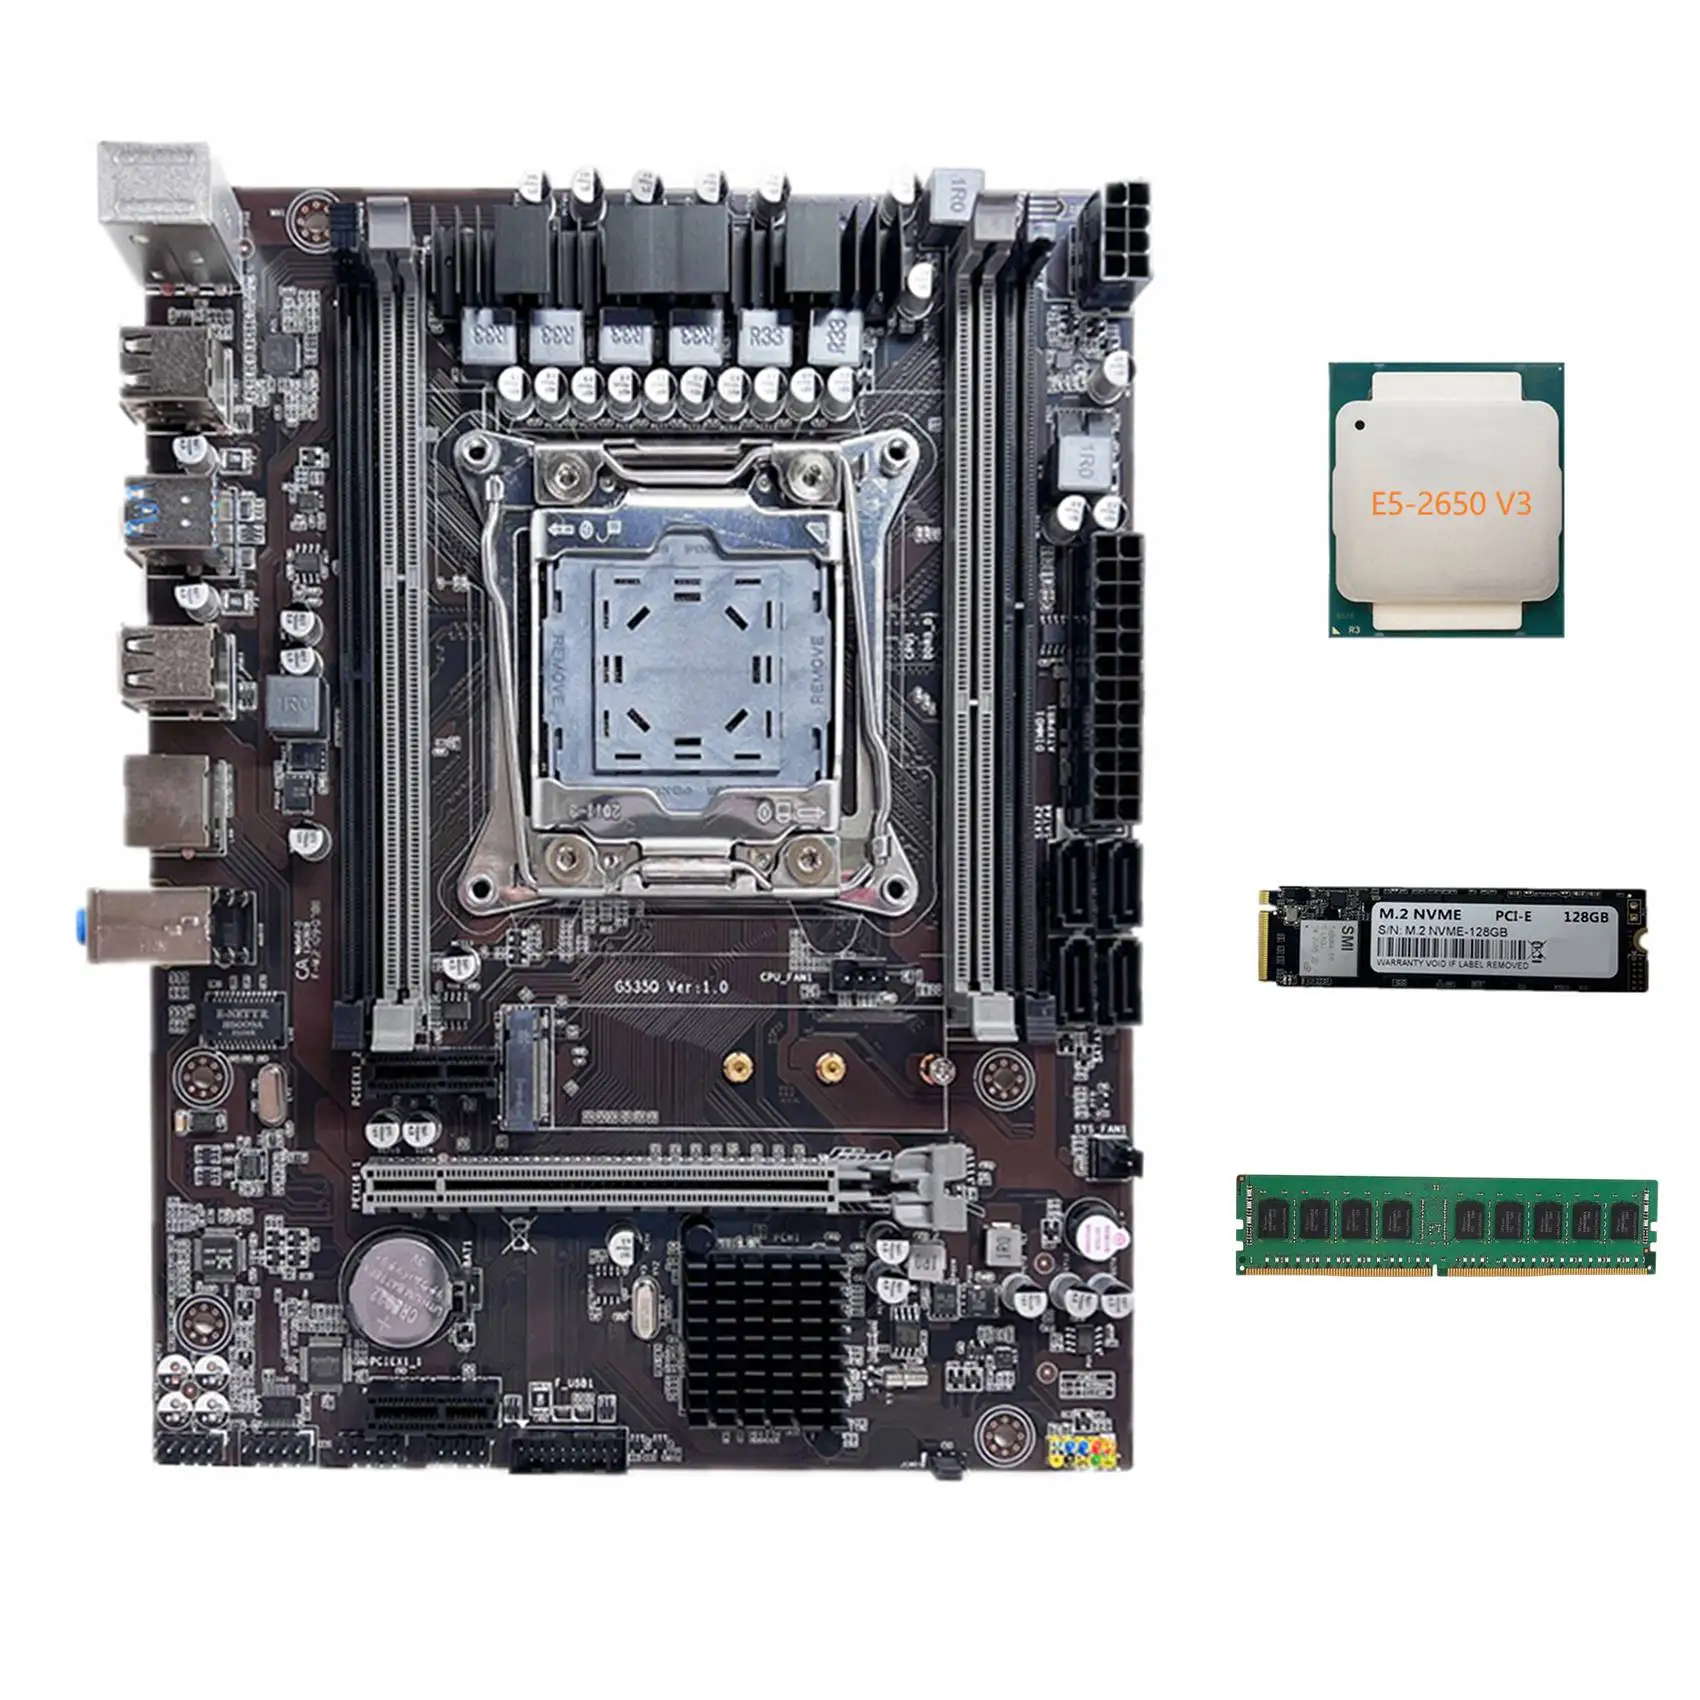 

X99 Motherboard LGA2011-3 Computer Motherboard with E5 2650 V3 CPU+M.2 NVME SSD 128G+DDR4 4GB 2133Mhz RAM Memory